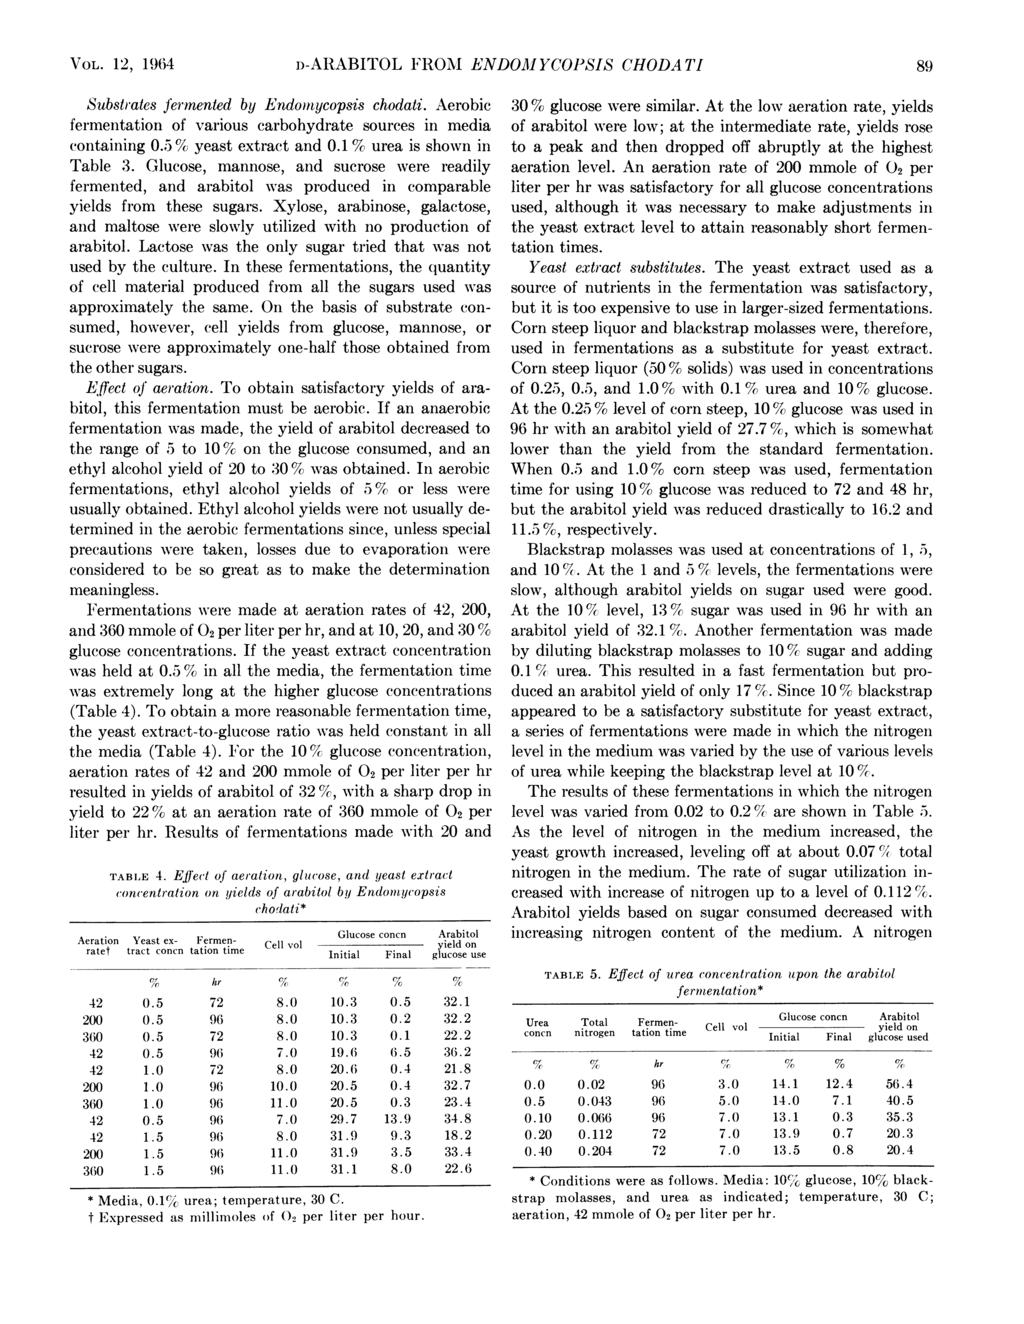 VOL. 12. 1964 D-ARABITOL FROM ENDOM-YCOPSIS CHODATI 89 Substr ates Jermented by Endoinycopsis chodati. Aerobic fermentation of various carbohydrate sources in media containing 0.